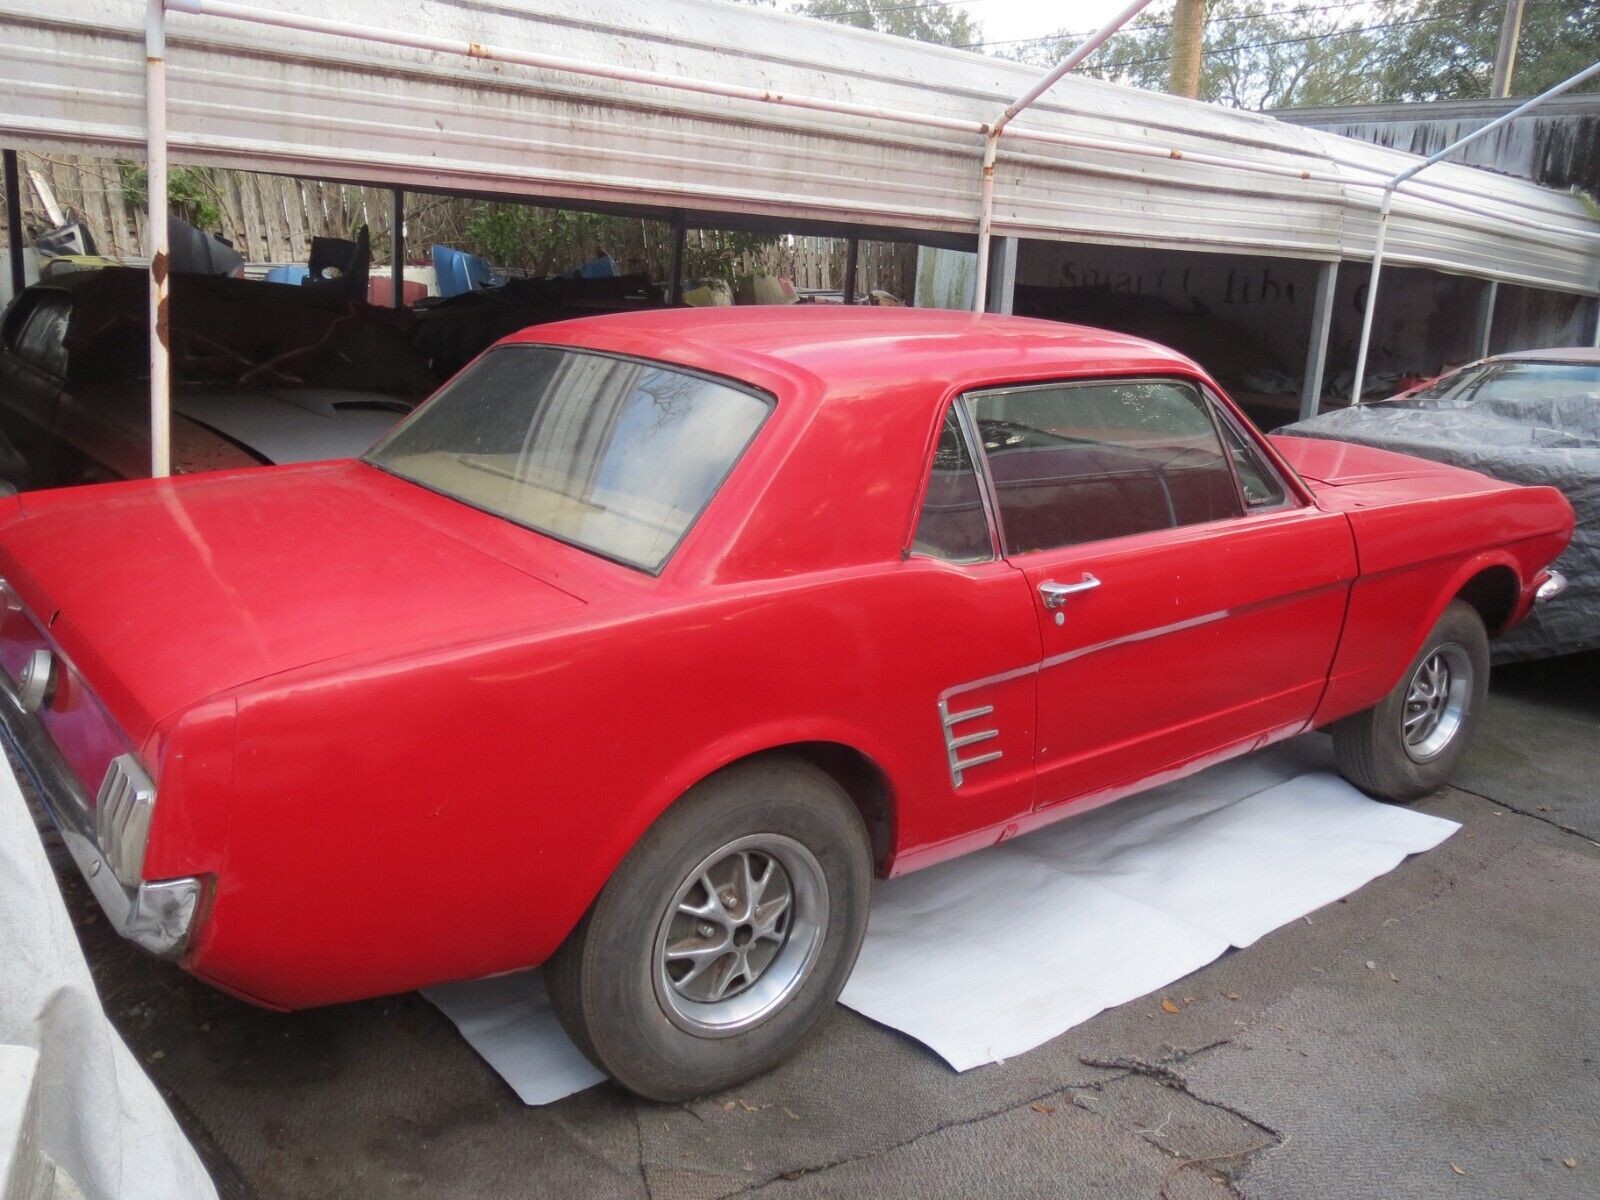 1965 K Code Mustang Rear View Barn Finds